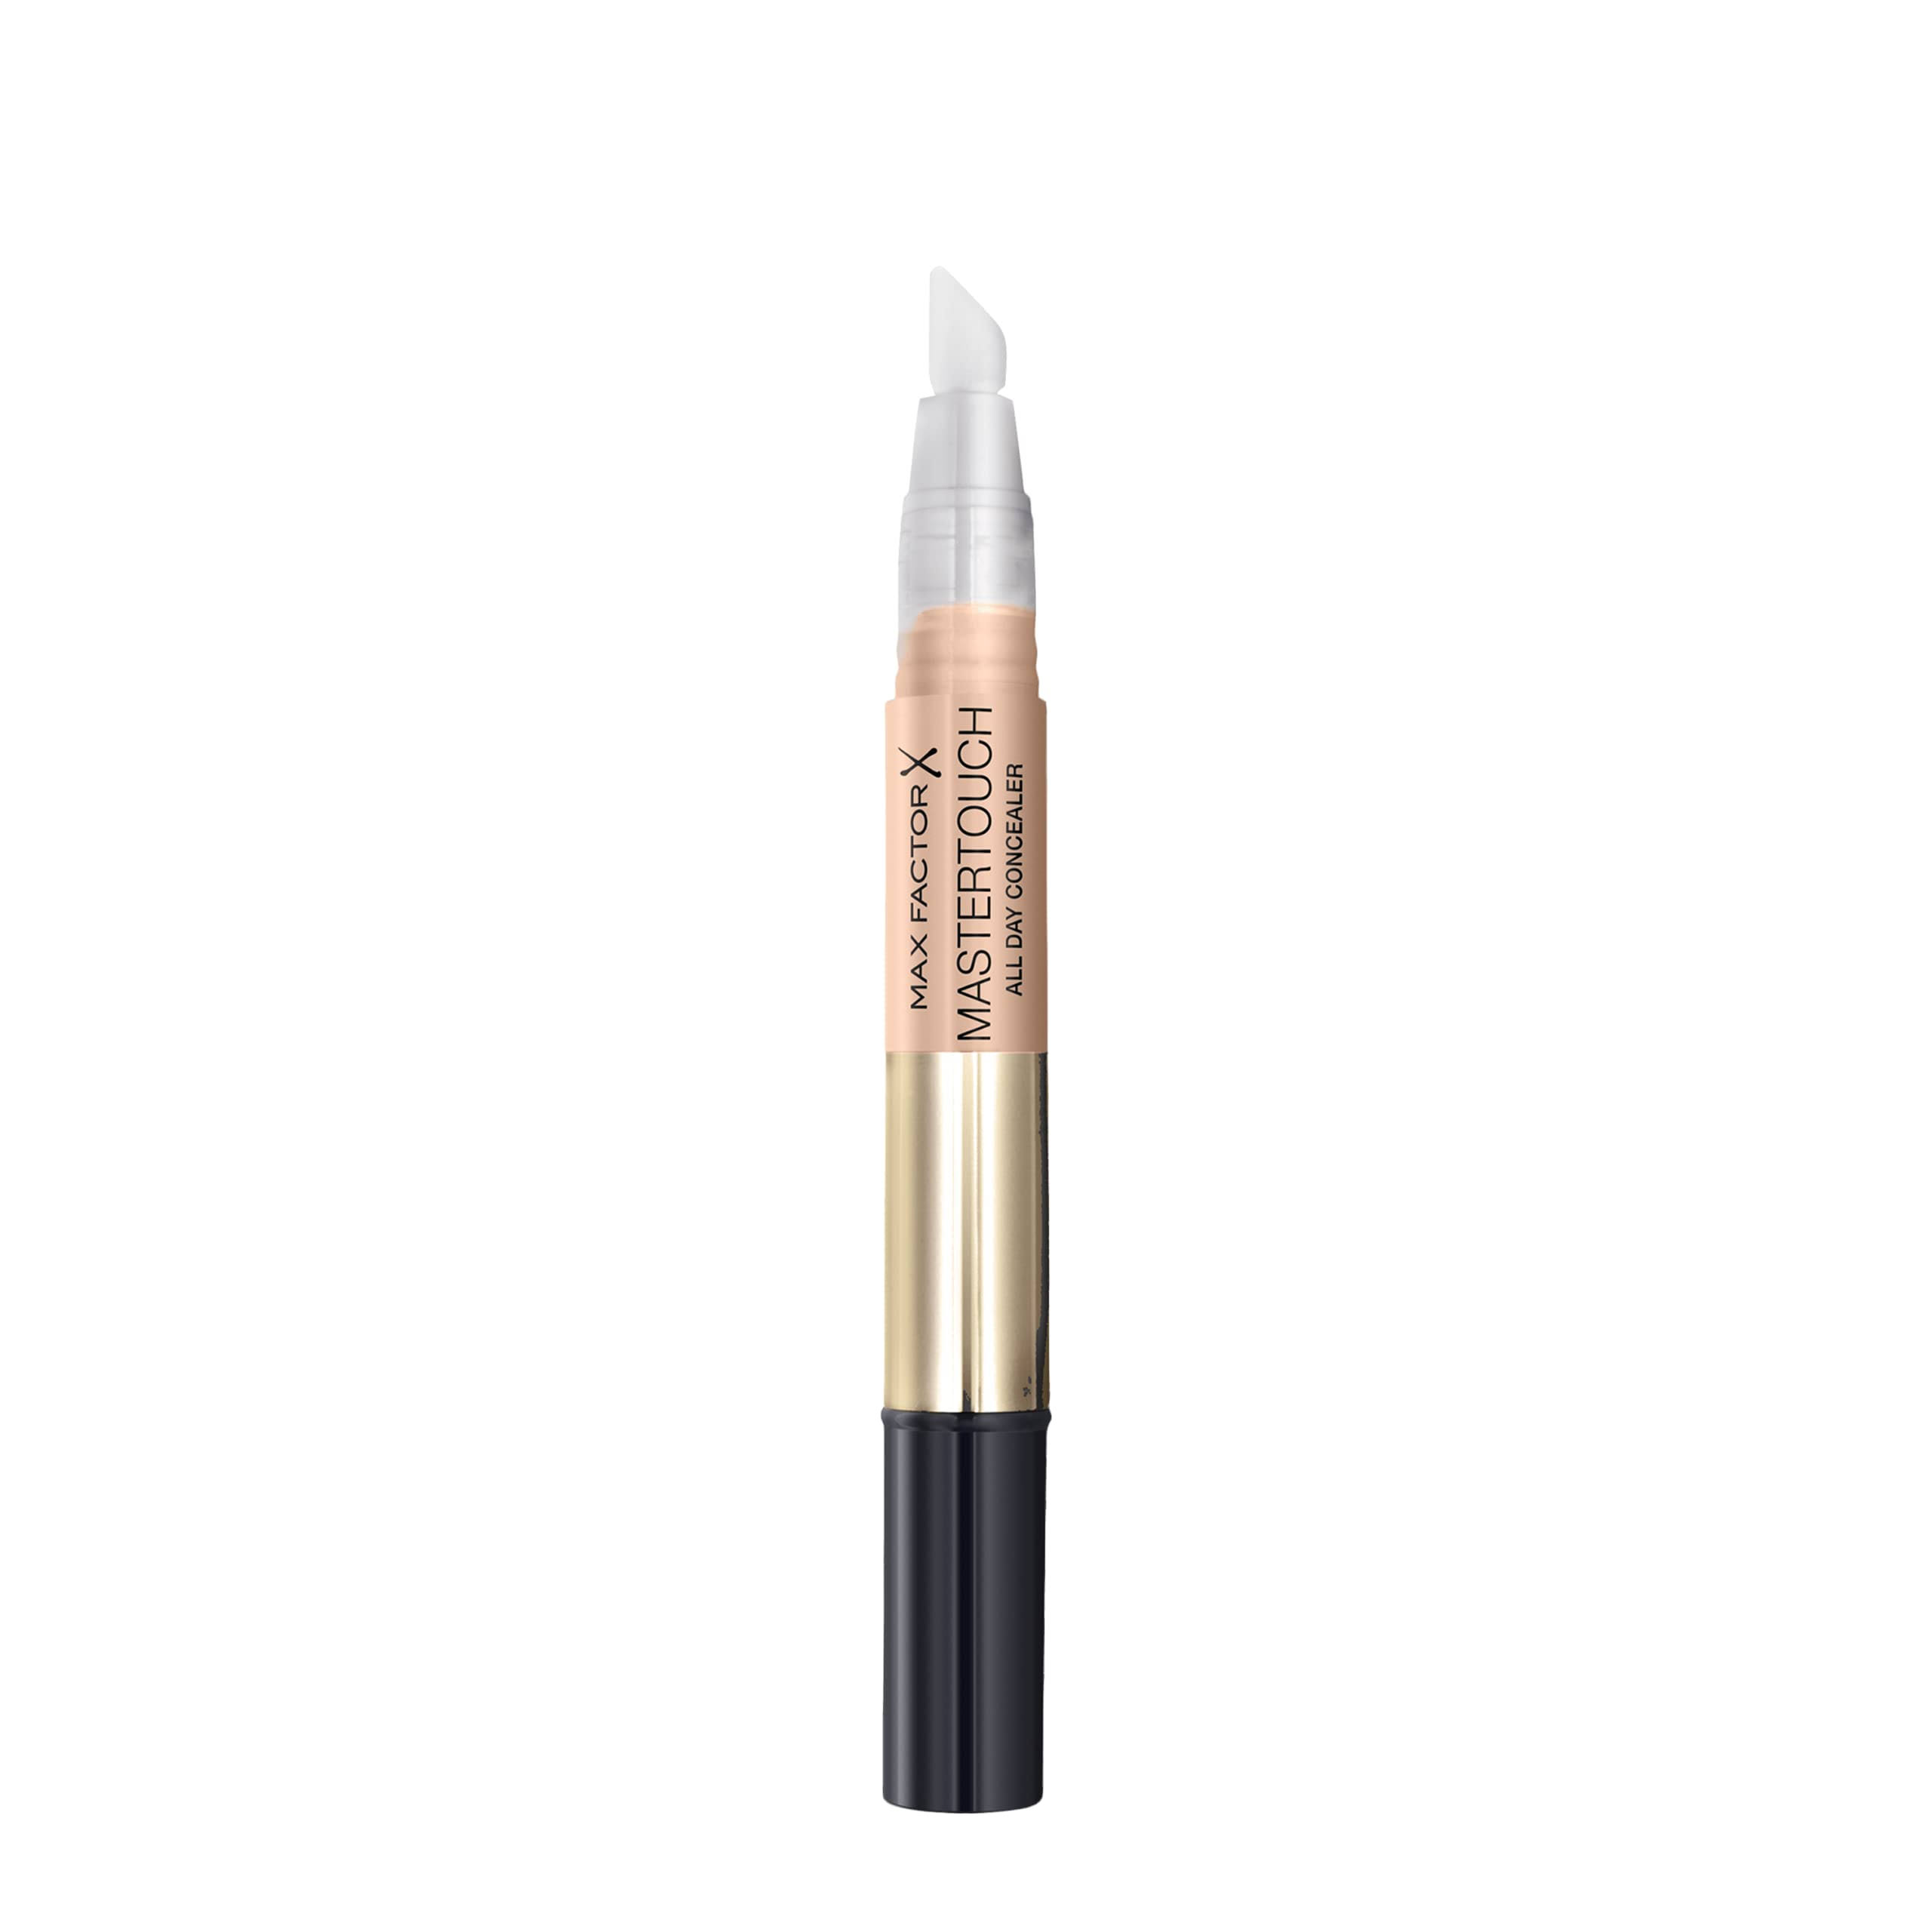 McSharry's Pharmacy Westside - Max Factor Mastertouch Concealer - 303 Ivory | Pointy